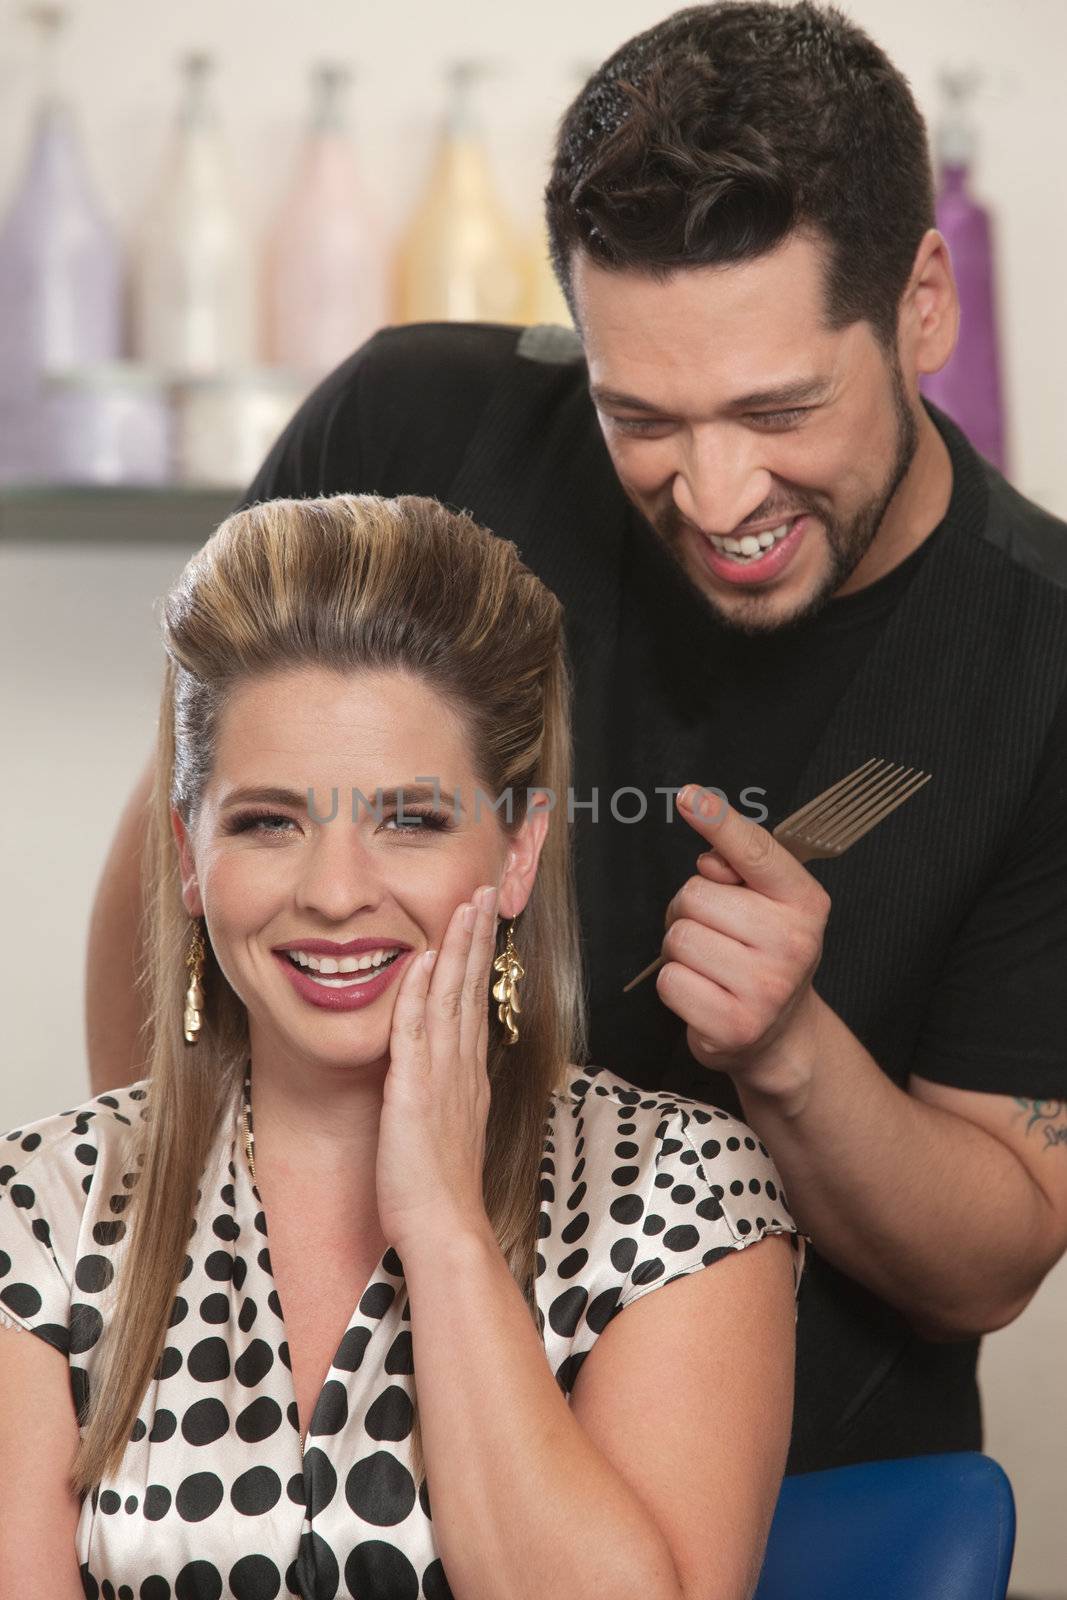 Blushing Lady with Hair Stylist by Creatista